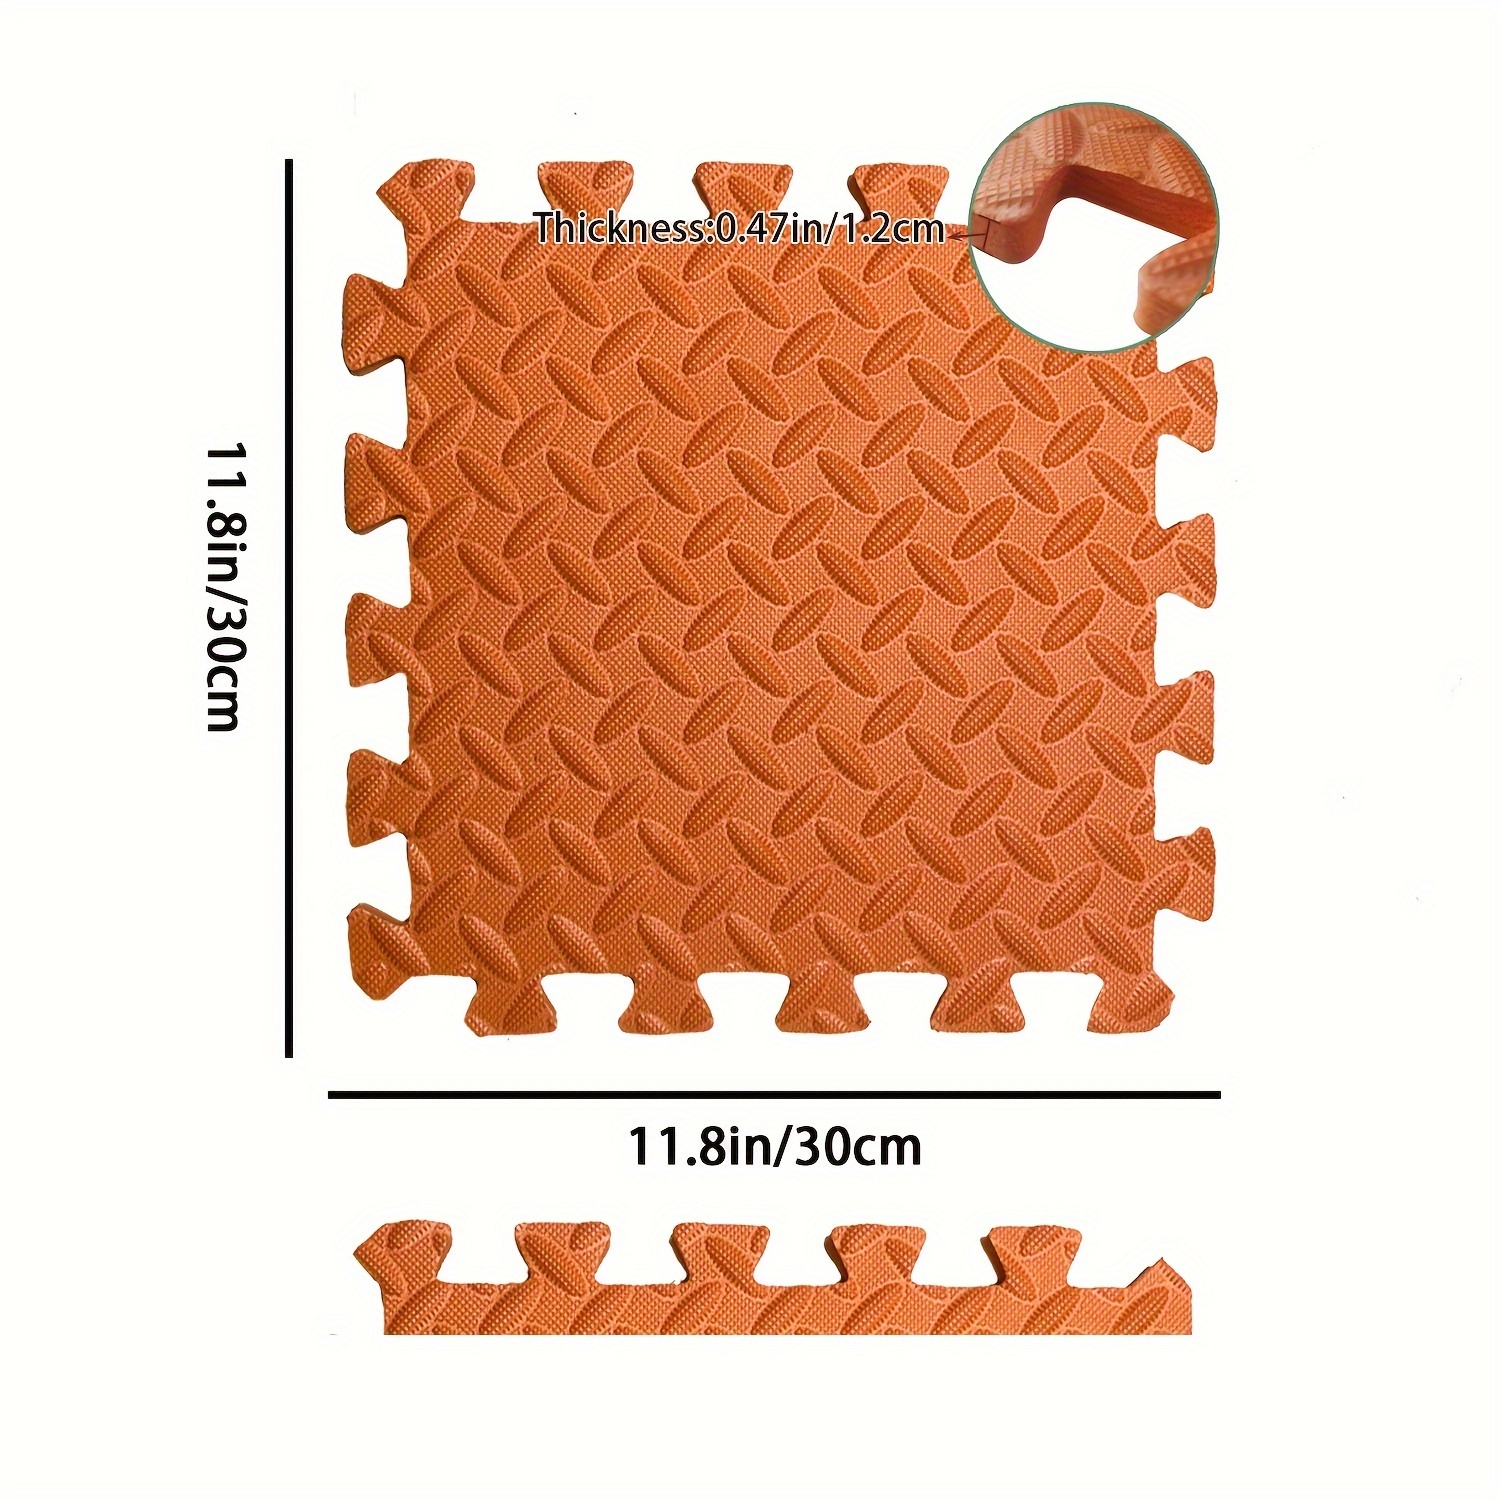 10pcs, Foam Tiles Interlocking Puzzle Foam Floor Mats Baby Play Mat For  Playing Exercise Mat For Home Workout Washable Cuttable Mat